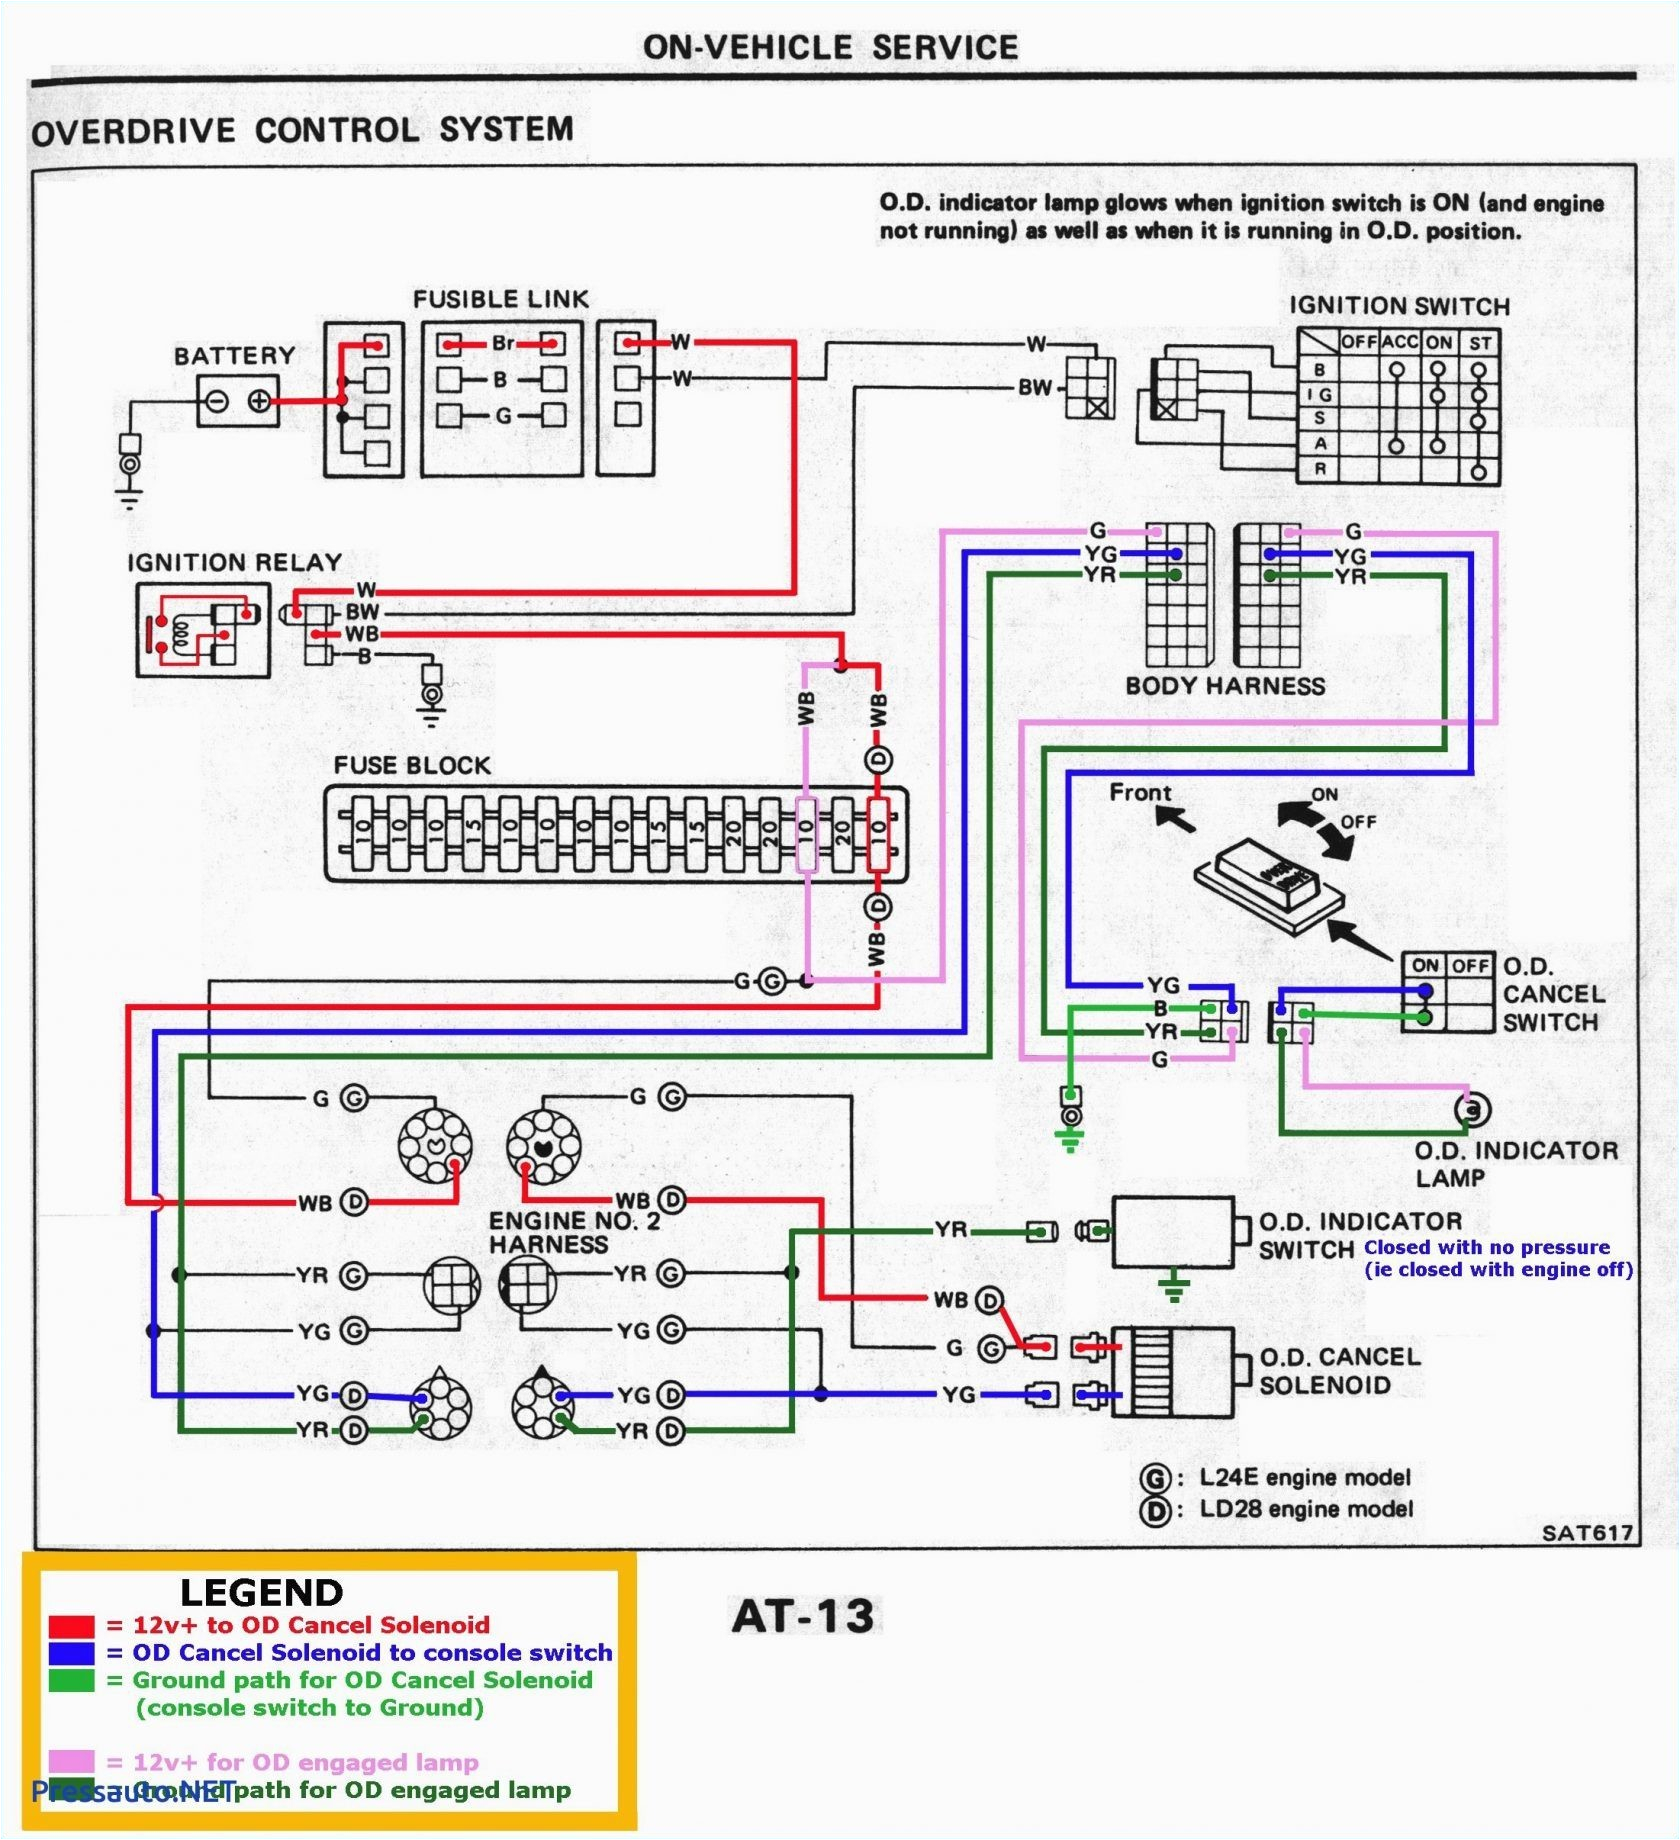 Toyota Hilux Wiring Diagram 2014 2009 toyota Pick Up Wiring Harness Wiring Diagram Note